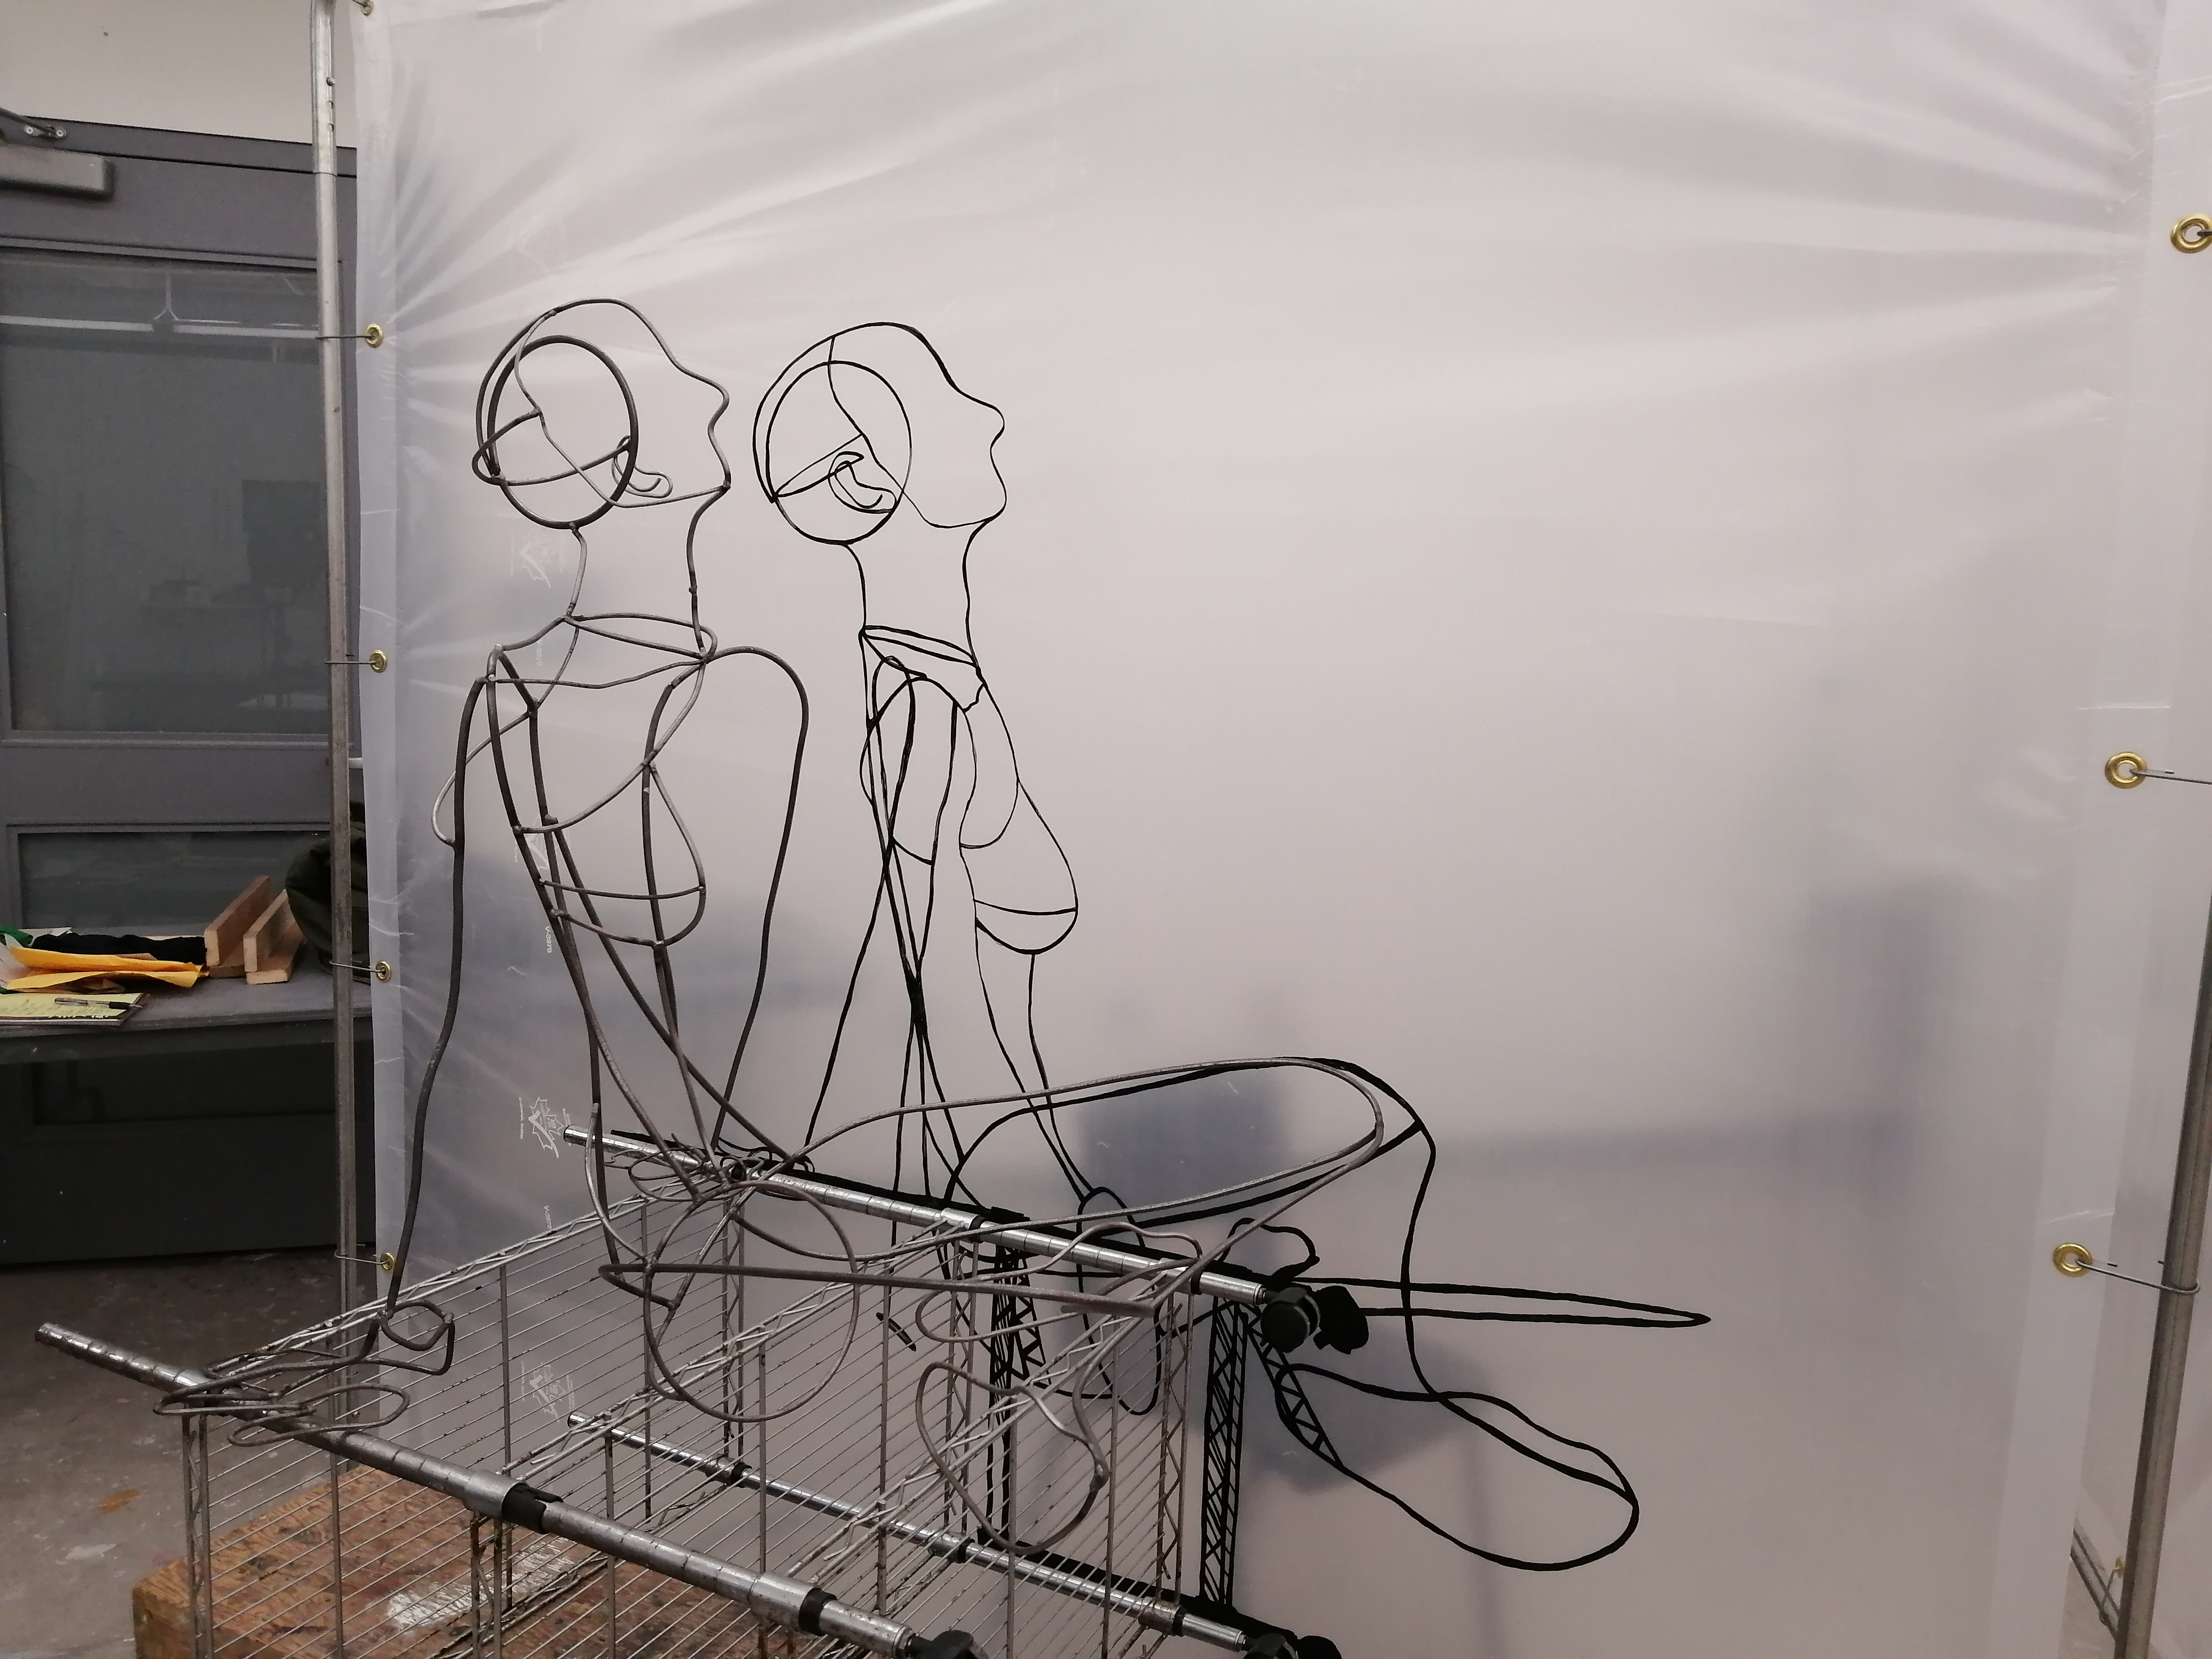 an artwork by Ada Denil consisting of translucent welding screens with line drawings